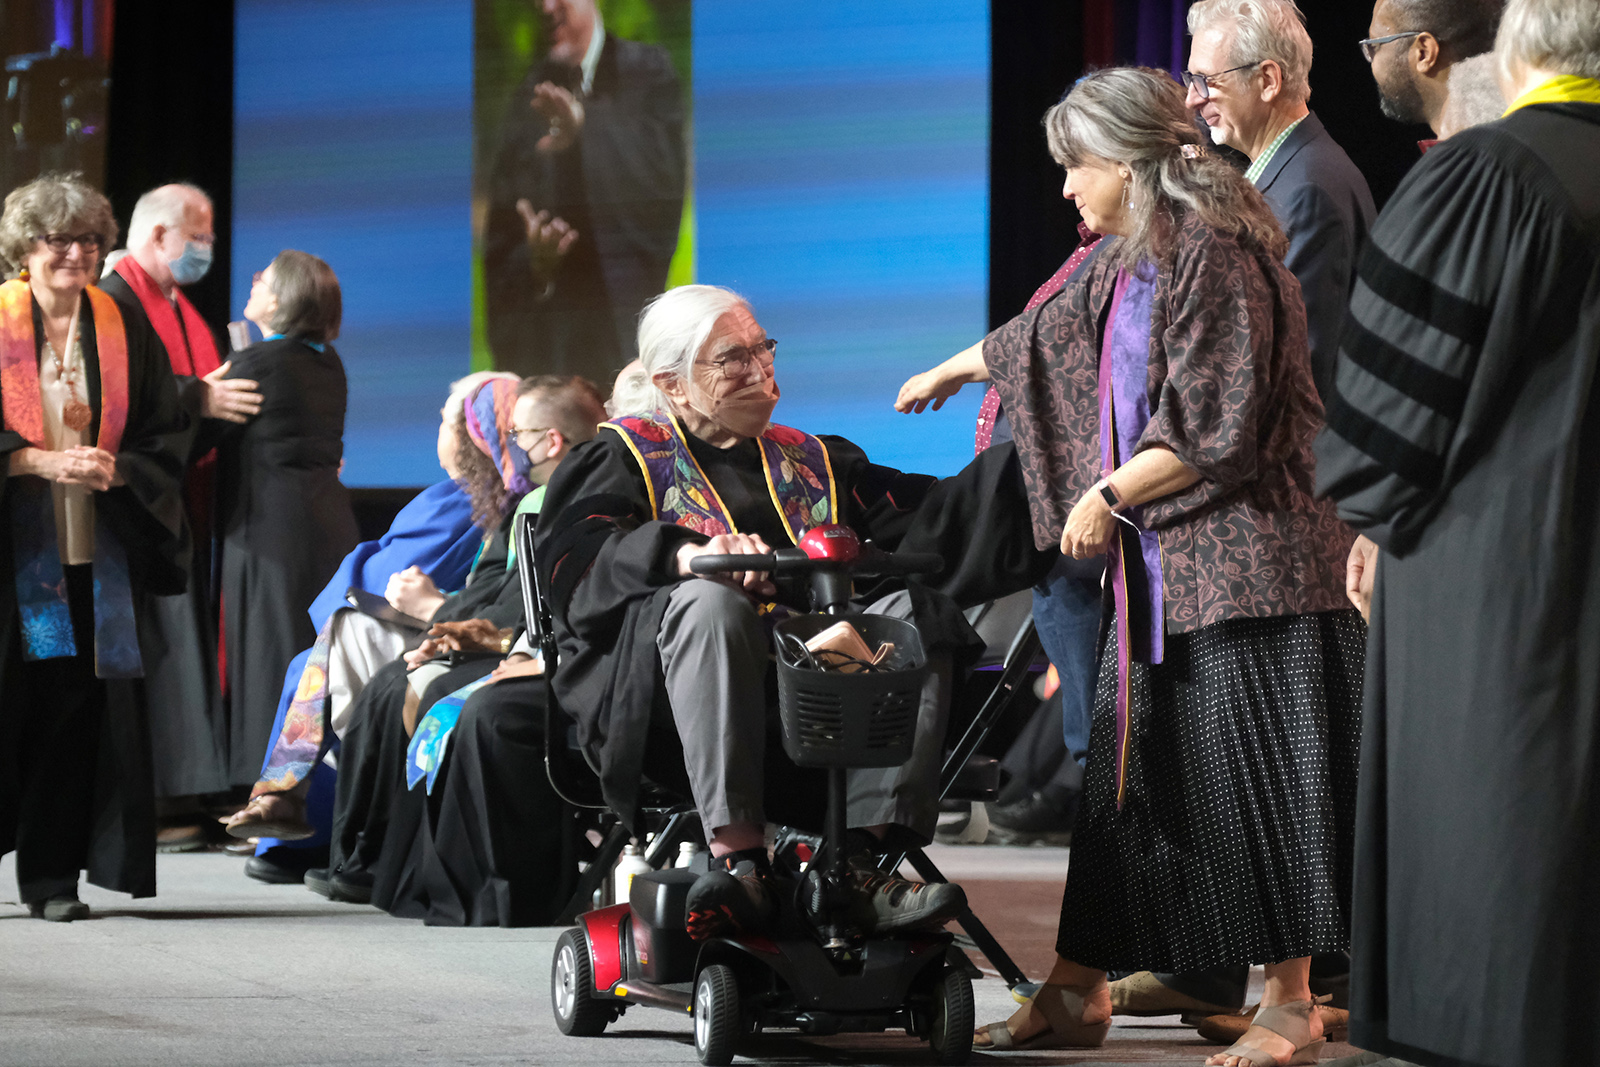 The Rev. Clyde Grubbs, center, crosses the stage as a religious professional completing service, greeted by Rev. Leslie Takahashi, President of UU Ministers Association, during the General Assembly, Thursday, June 22, 2023, in Pittsburgh, Pennsylvania. Photo © 2023 Nancy Pierce/UUA